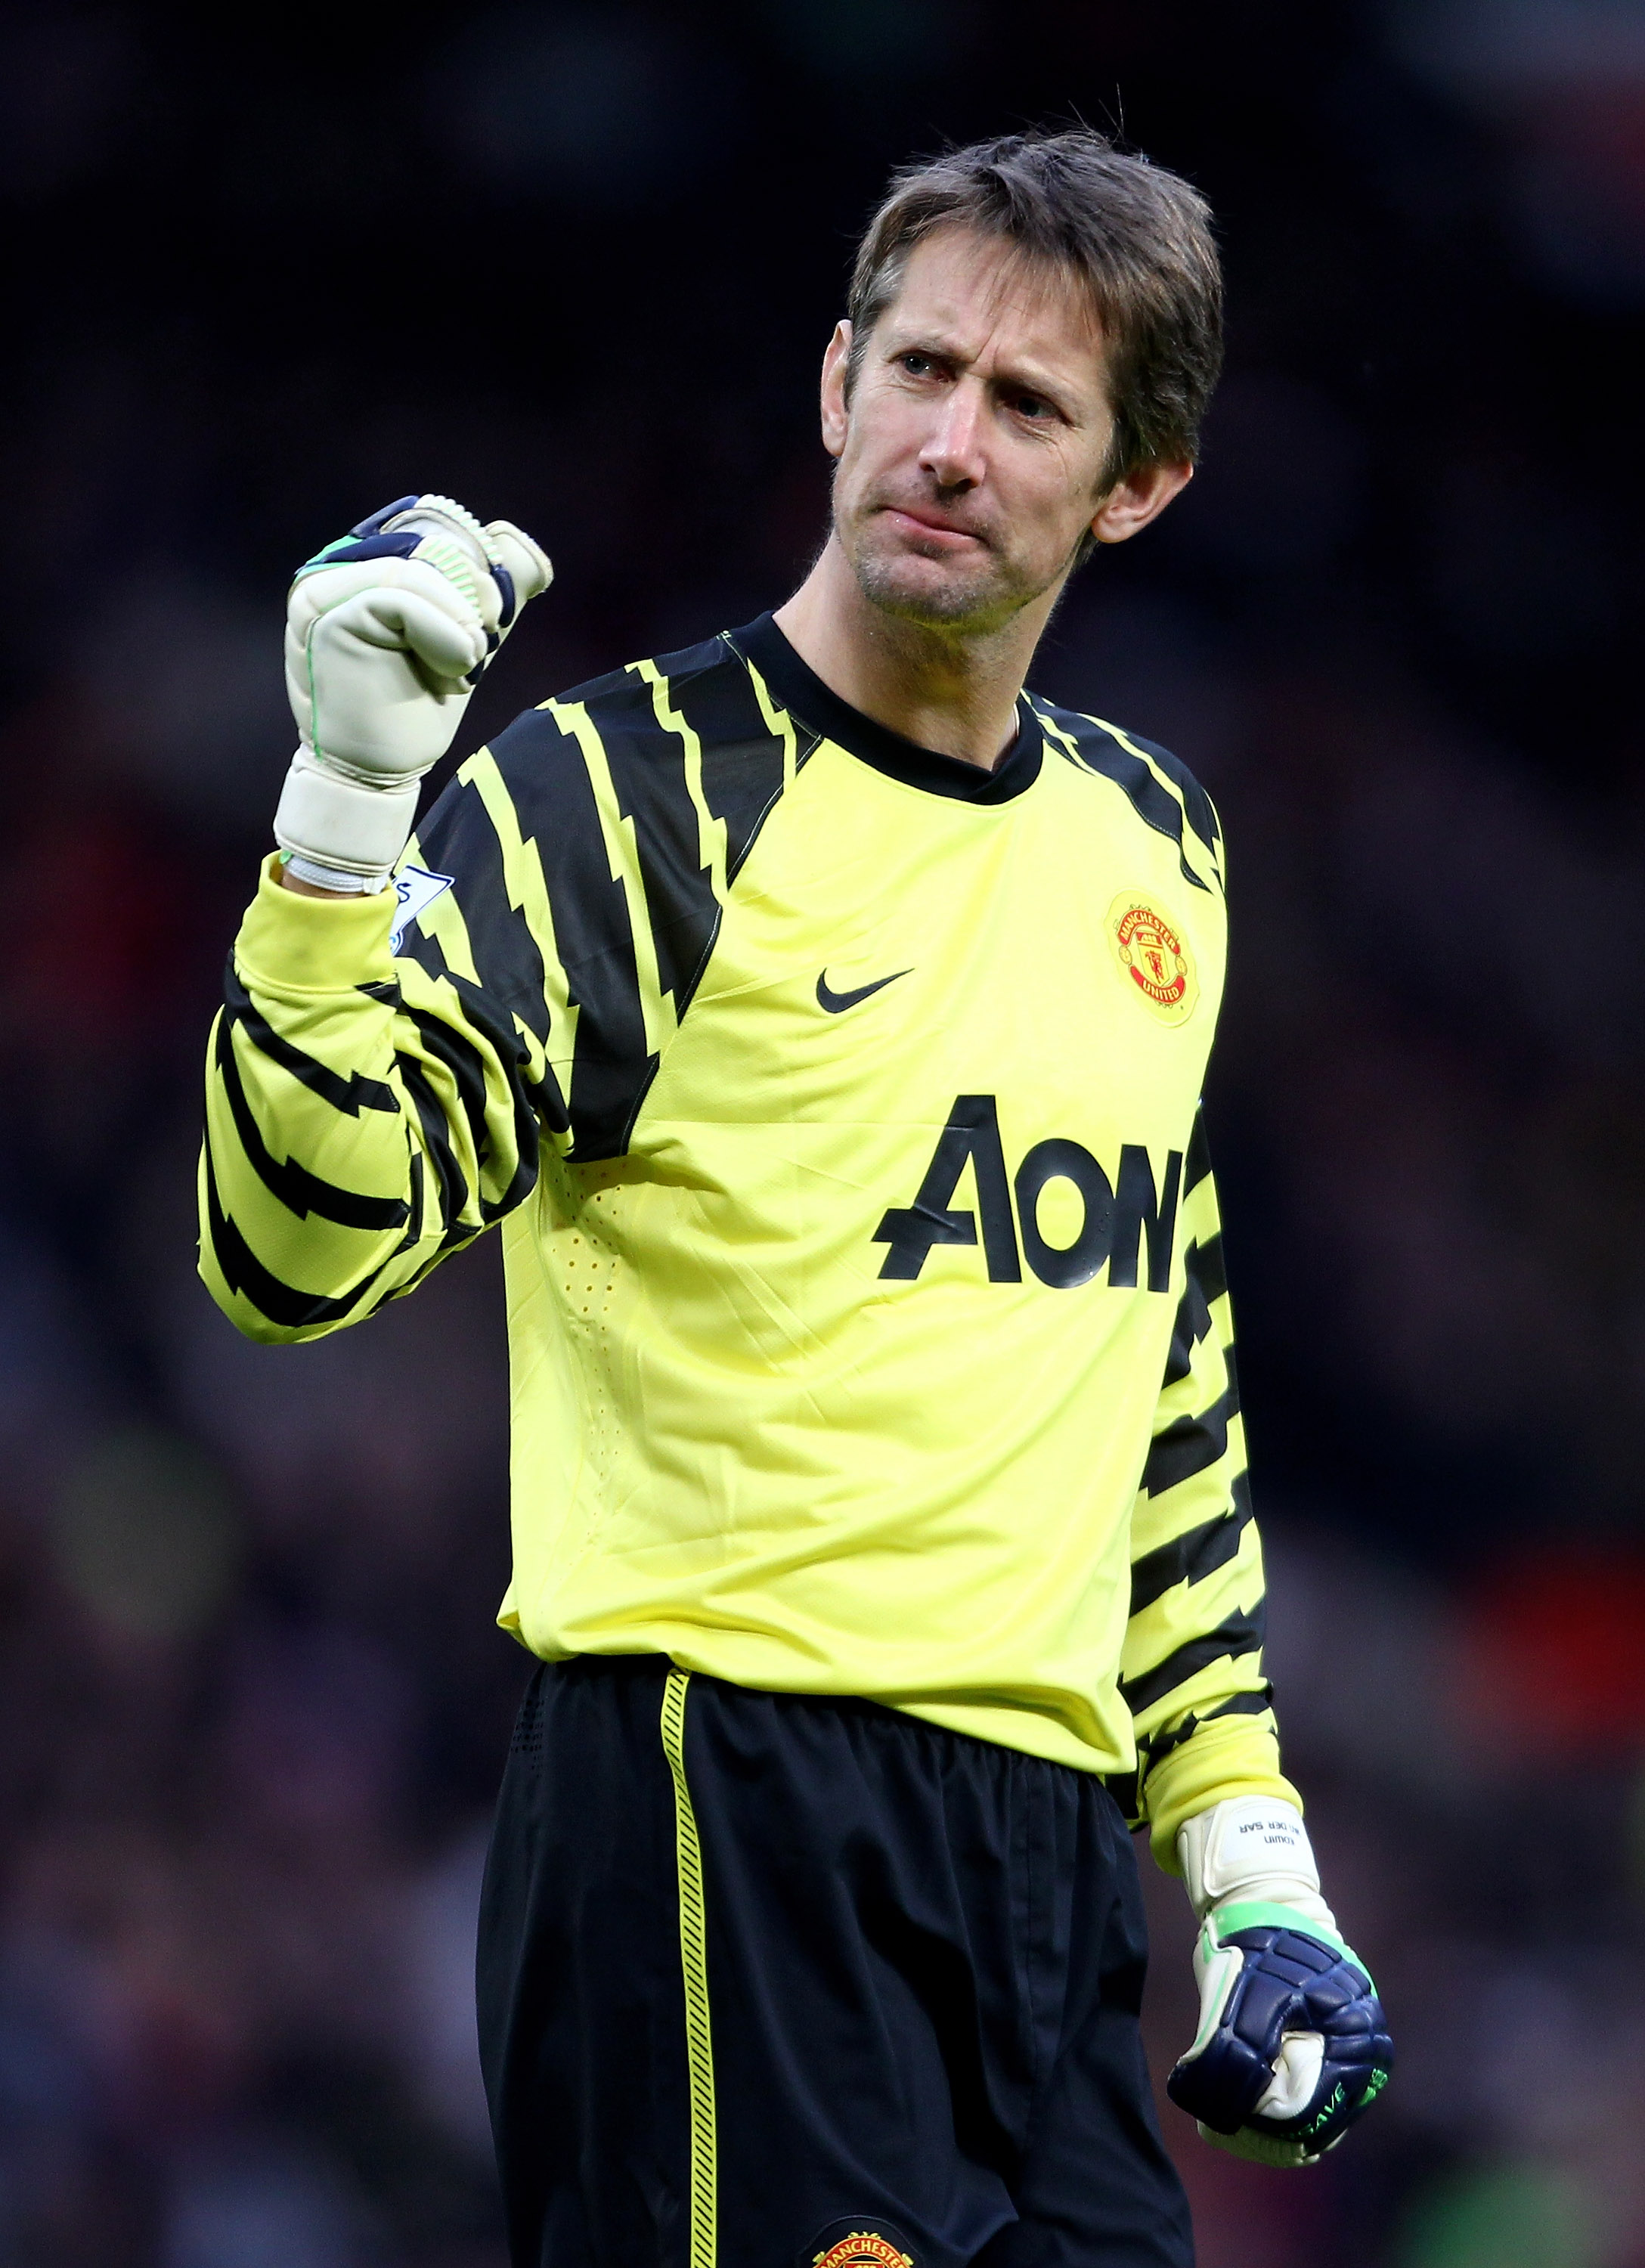 MANCHESTER, ENGLAND - DECEMBER 26:   Edwin van der Sar of Manchester United celebrates his team's opening goal during the Barclays Premier League match between Manchester United and Sunderland at Old Trafford on December 26, 2010 in Manchester, England. (